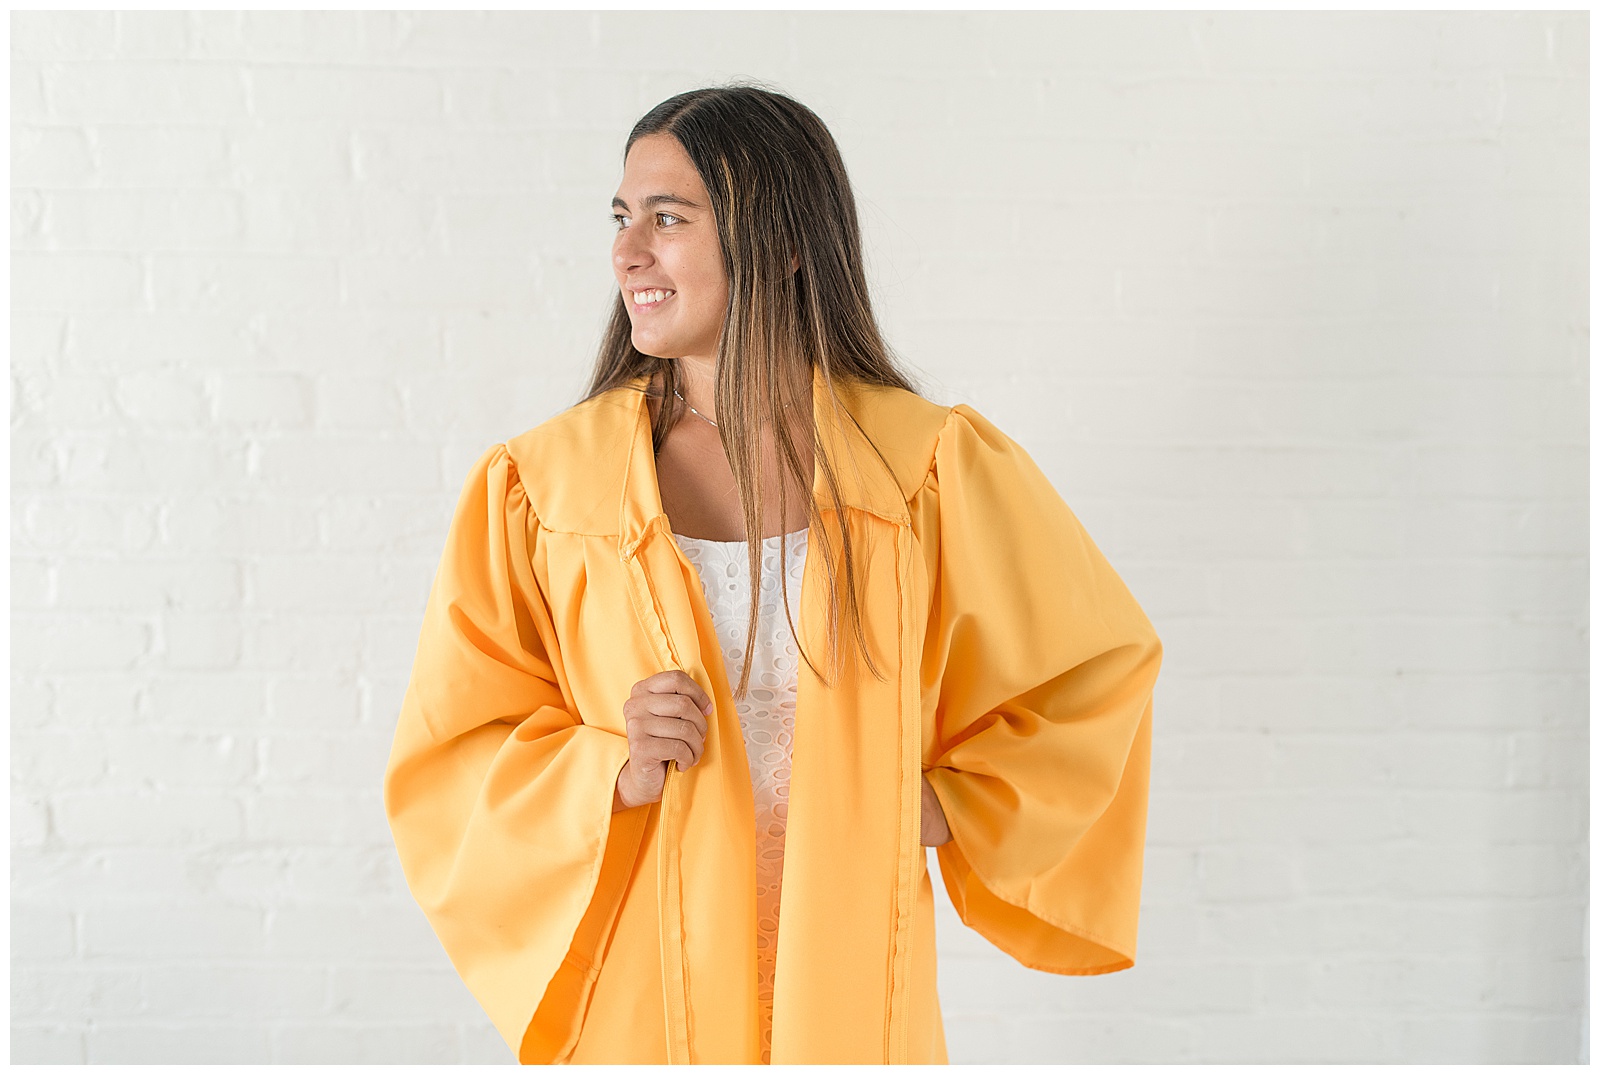 senior smiling off camera in her yellow graduation gown